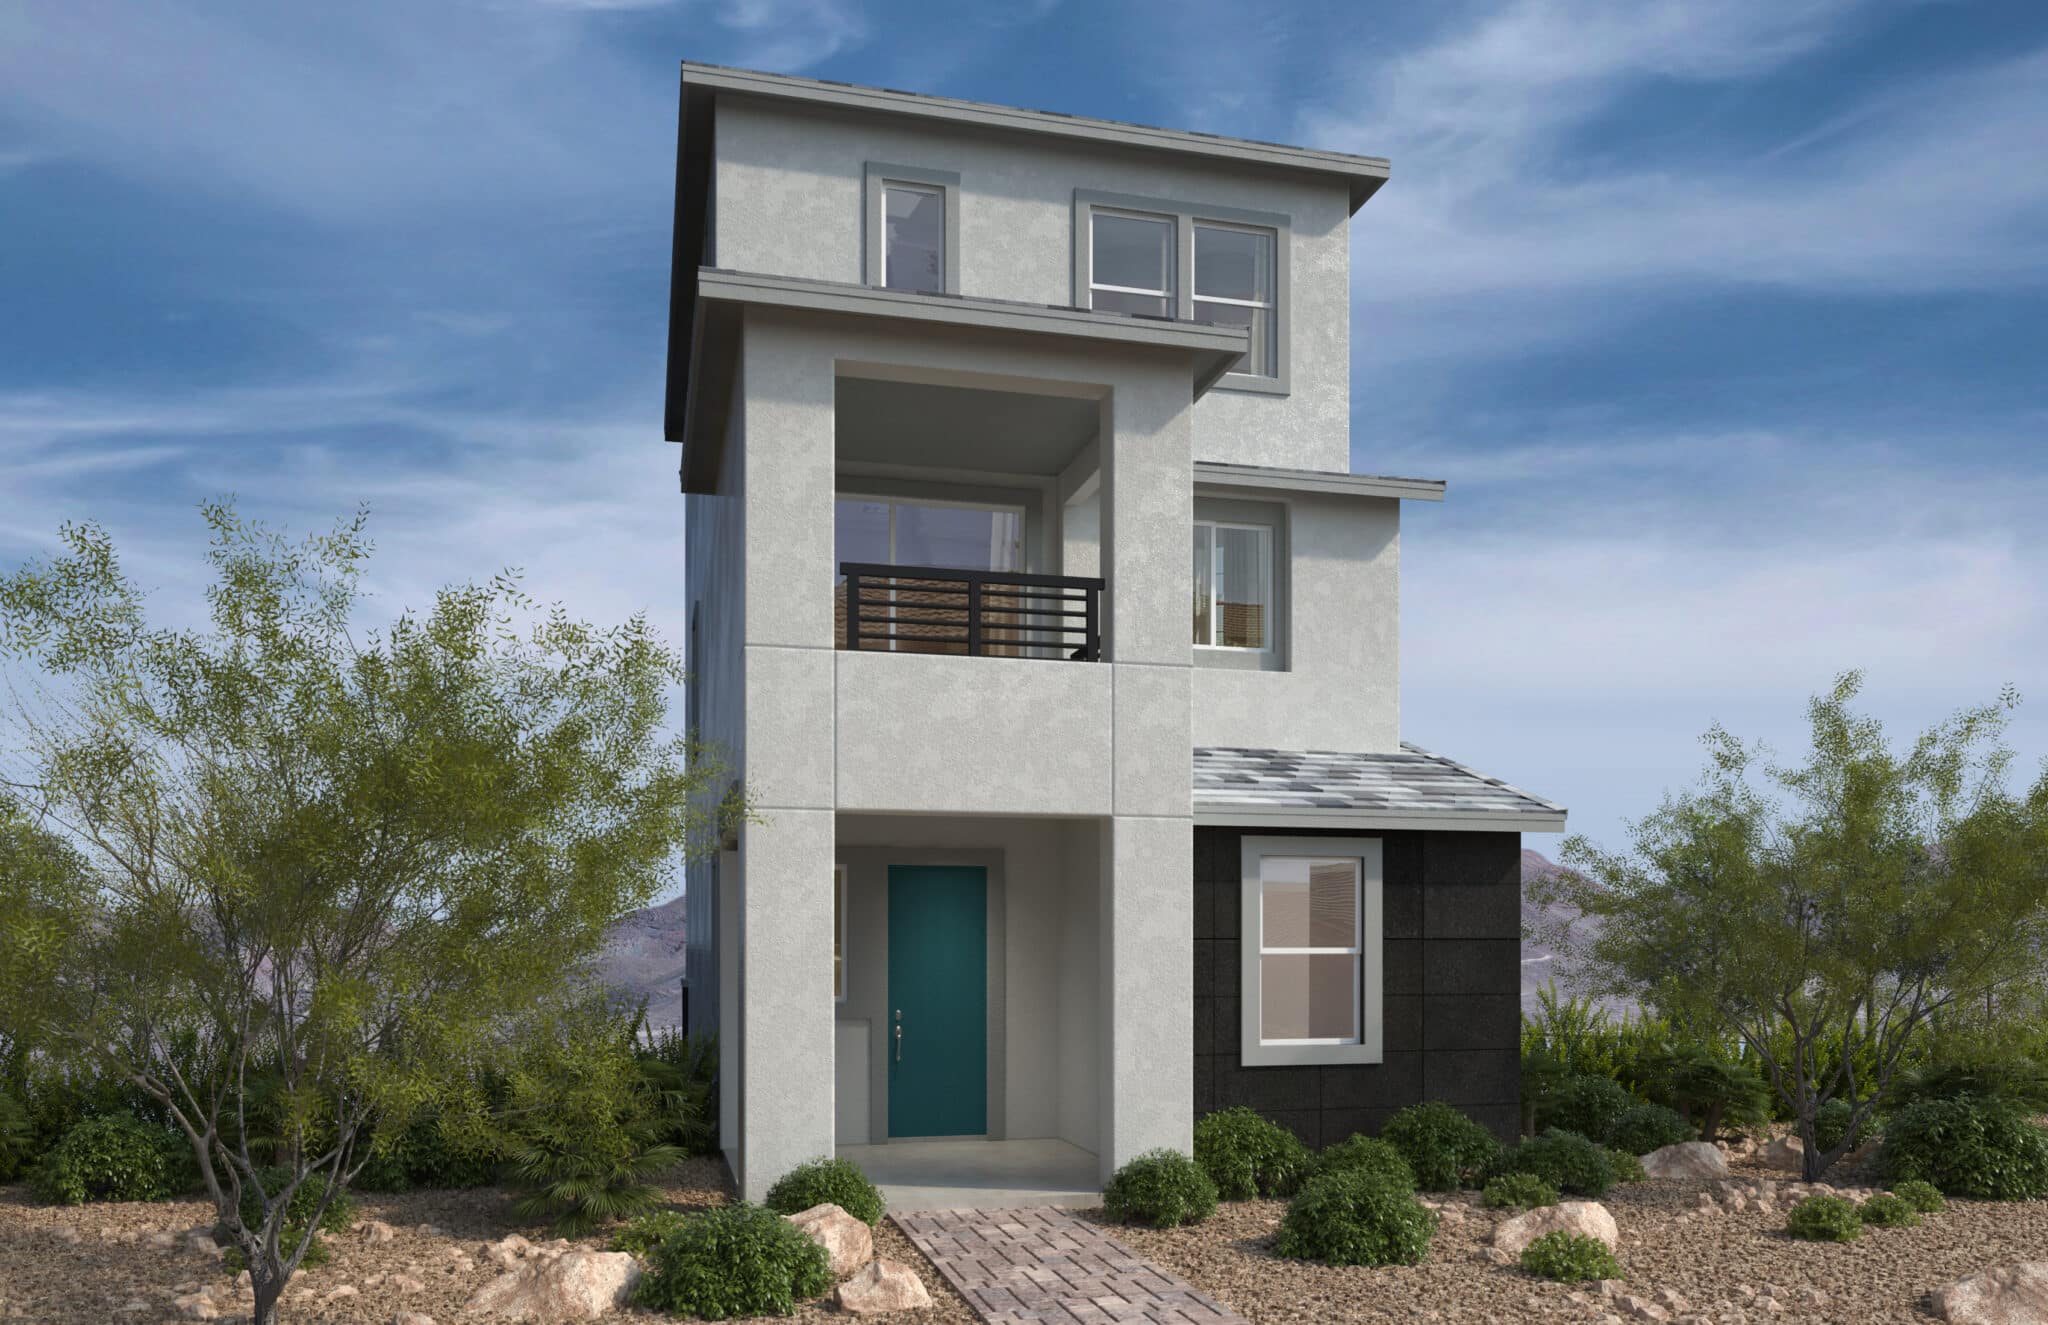 Elevation C of Plan 1651 at Quail Cove by KB Home